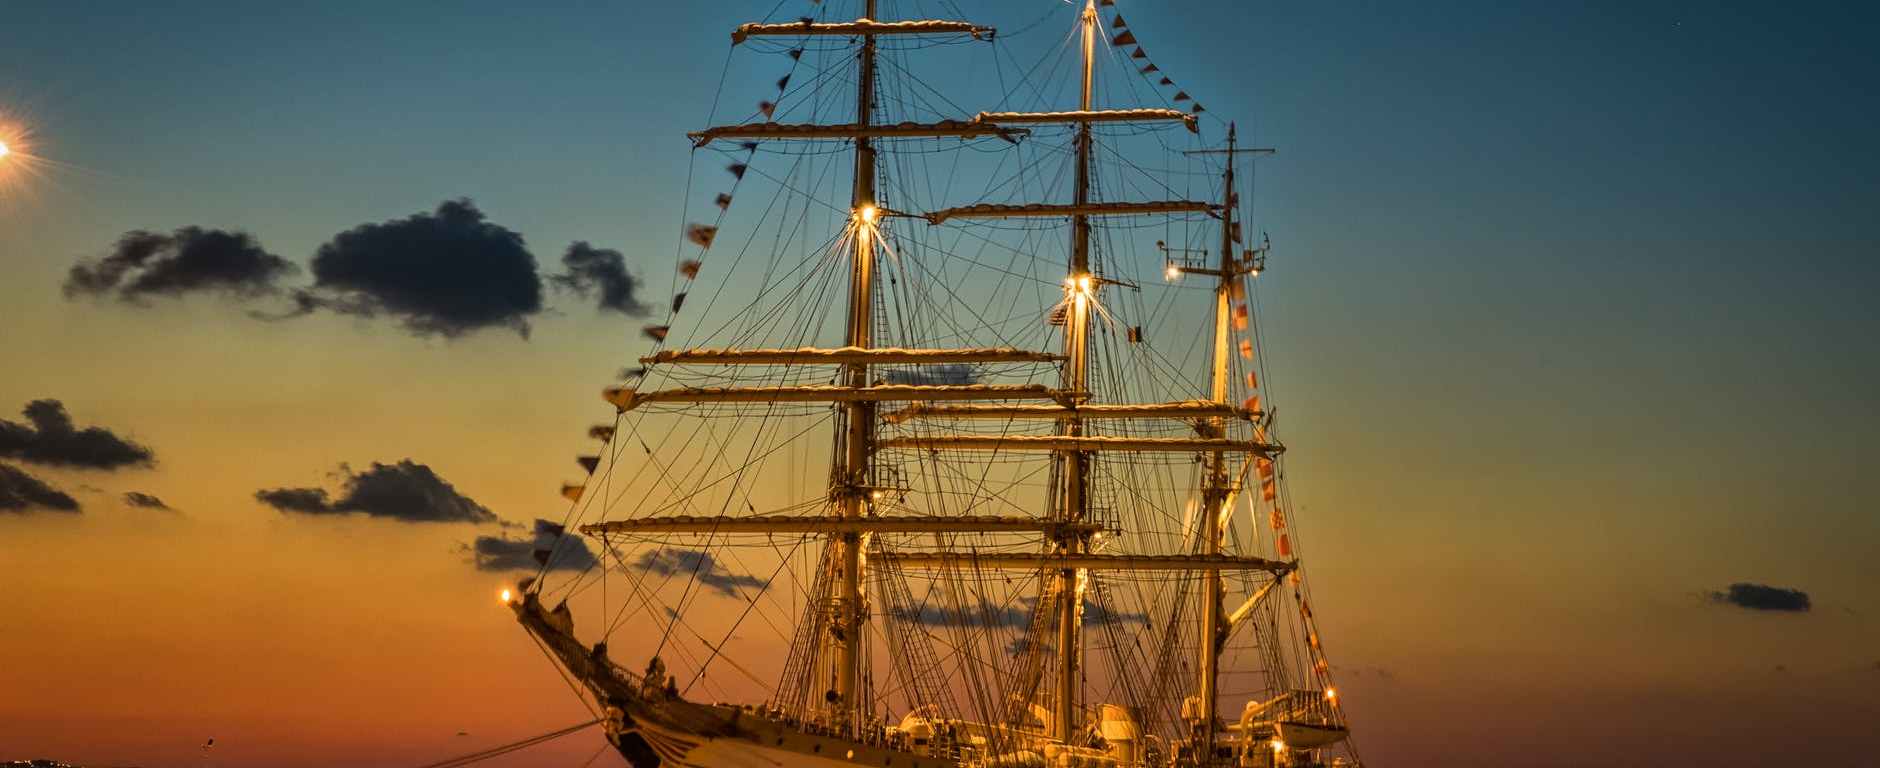 Tall 3-masted ship at sunset anchored with decorative flags